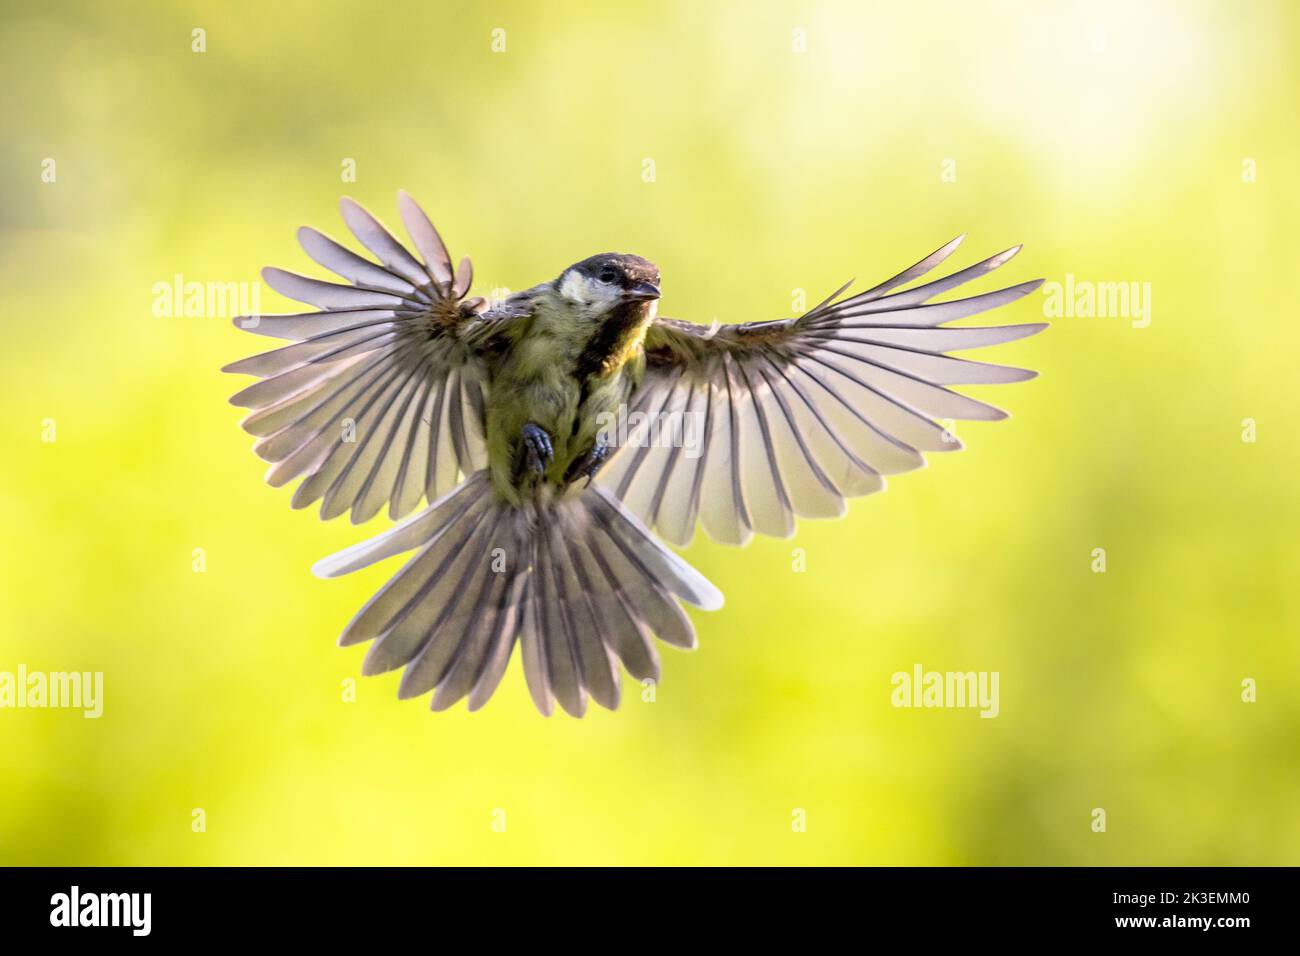 Great tit (Parus major) bird in flight just before landing with visible stretched spread feathers on green background Stock Photo